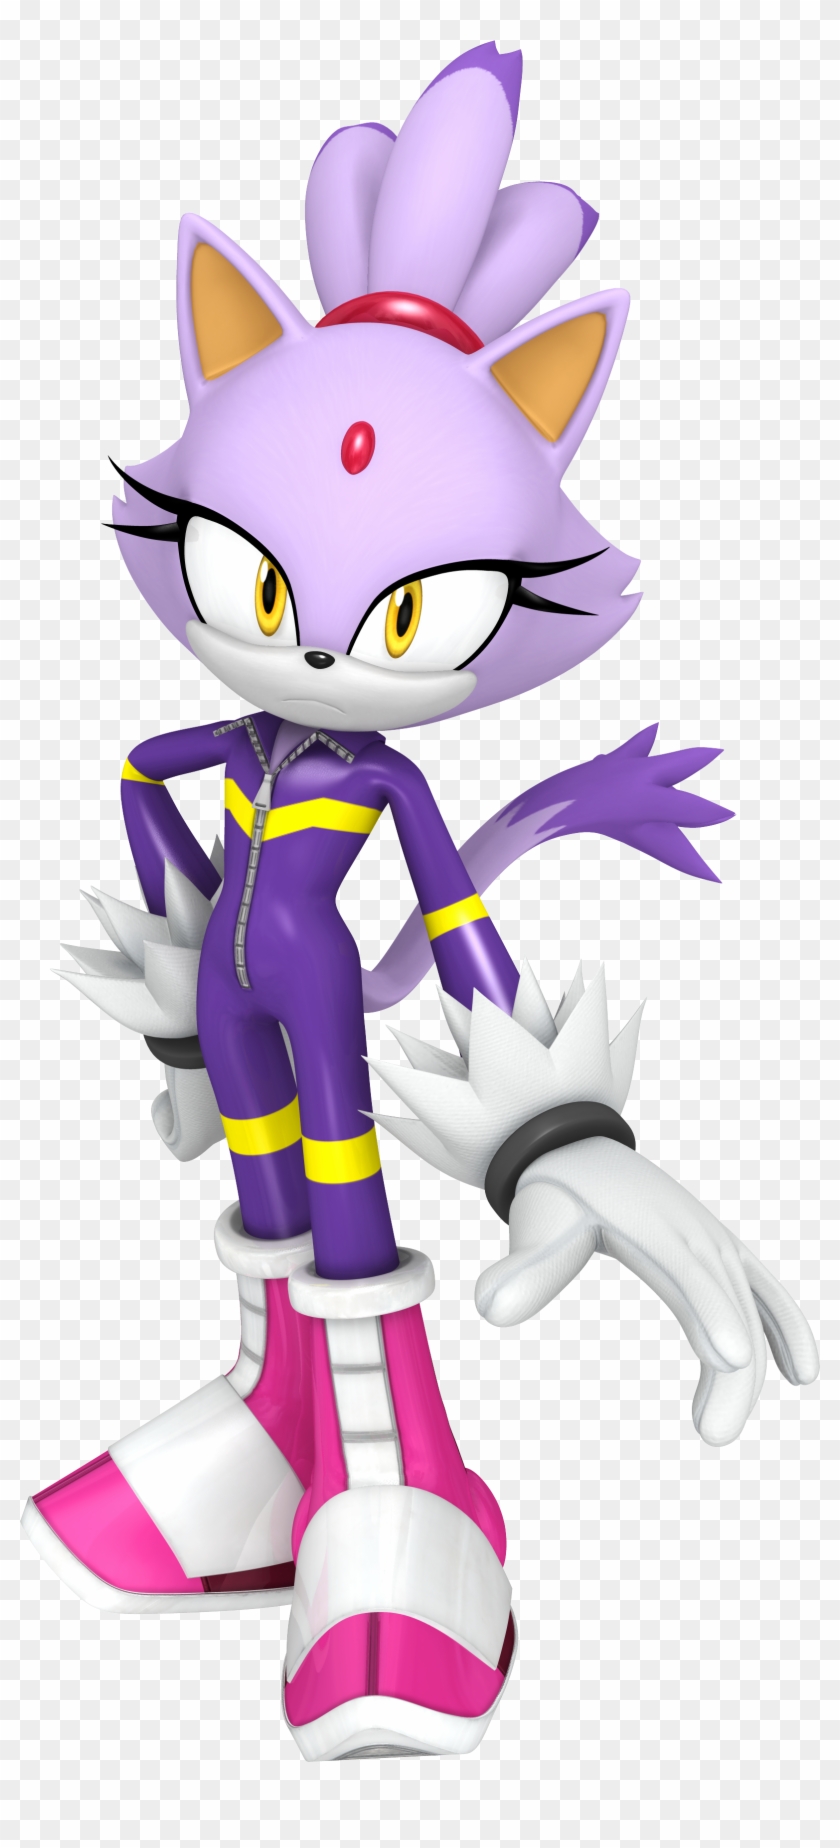 Latest Sonic Costume, Eggman, Silver The Hedgehog, - Blaze The Cat Sonic Free Riders Clipart